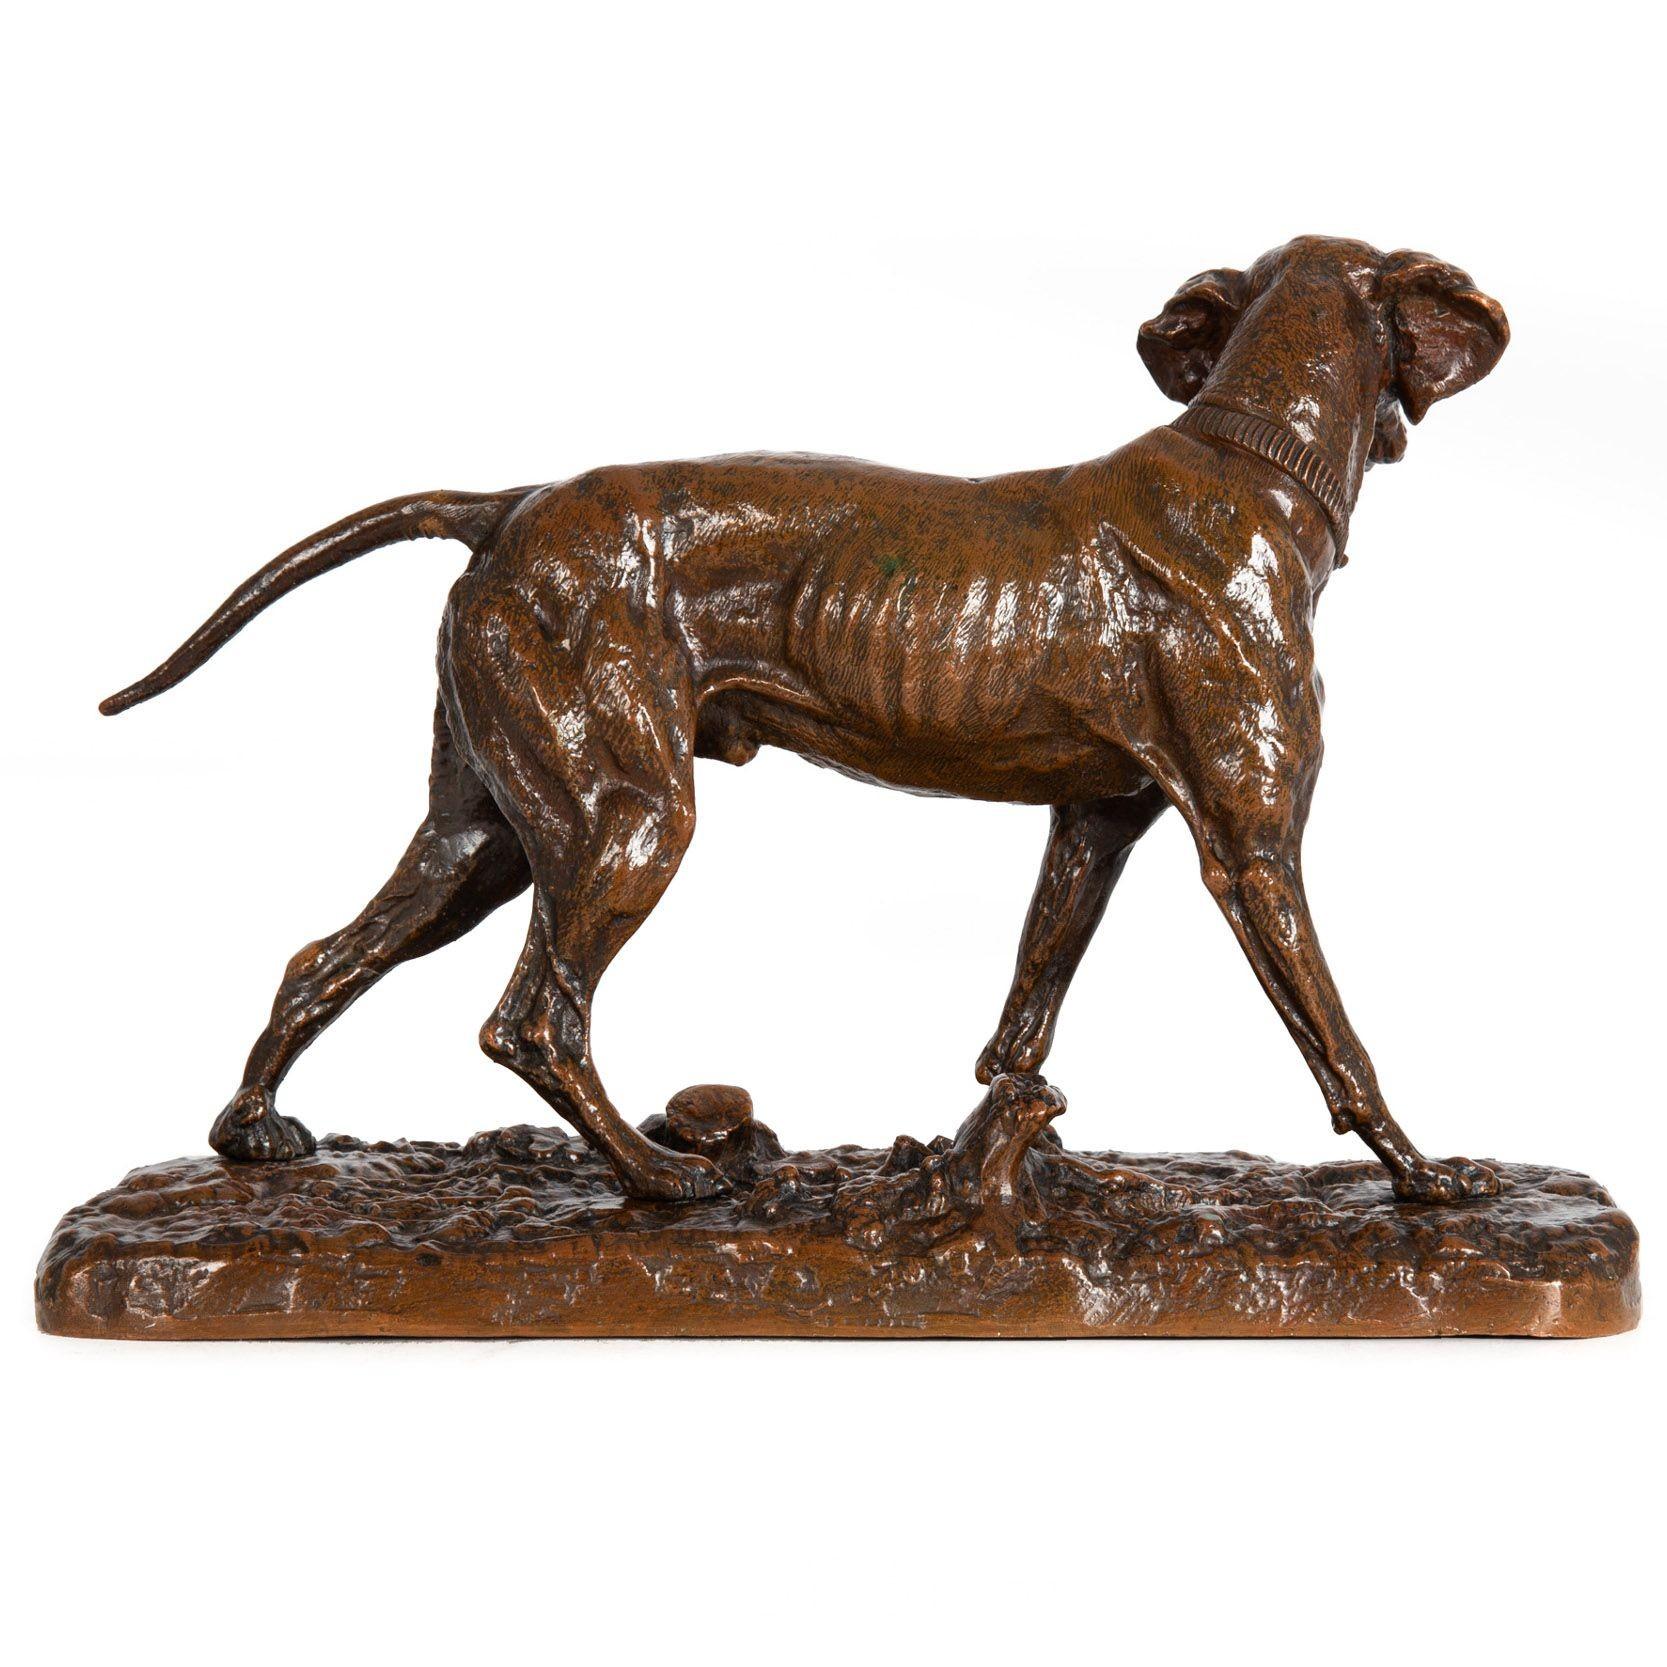 French Antique Copper-Electrotype Sculpture “Chien Braque”, Pierre-Jules Mêne In Good Condition For Sale In Shippensburg, PA